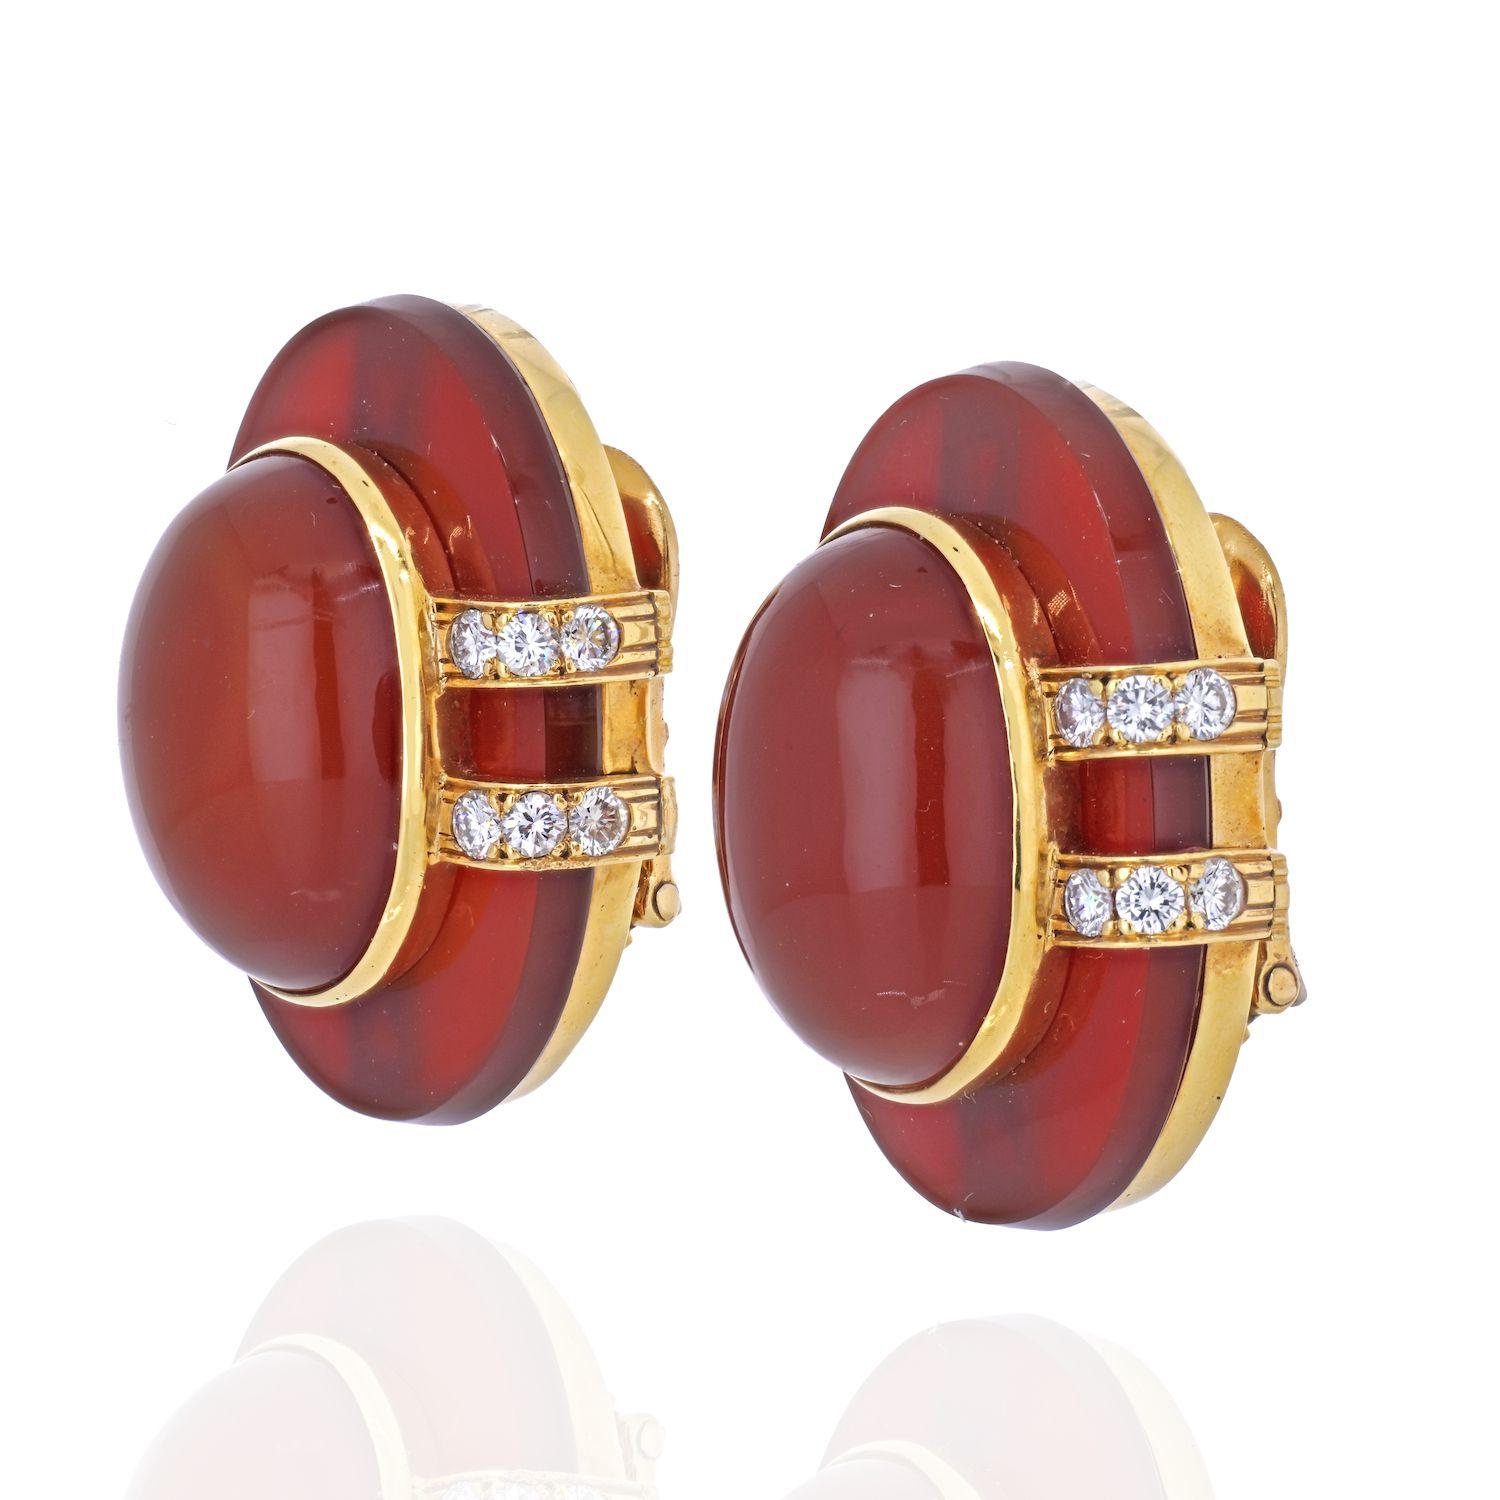 The perfect touch of red for any occasion, these tasteful David Webb Carnelian and Diamond oval cabochon clip earrings are sure to become an instant favorite. Fashioned in precious 18K gold, each dazzler showcases a vivid oval shaped cabochon